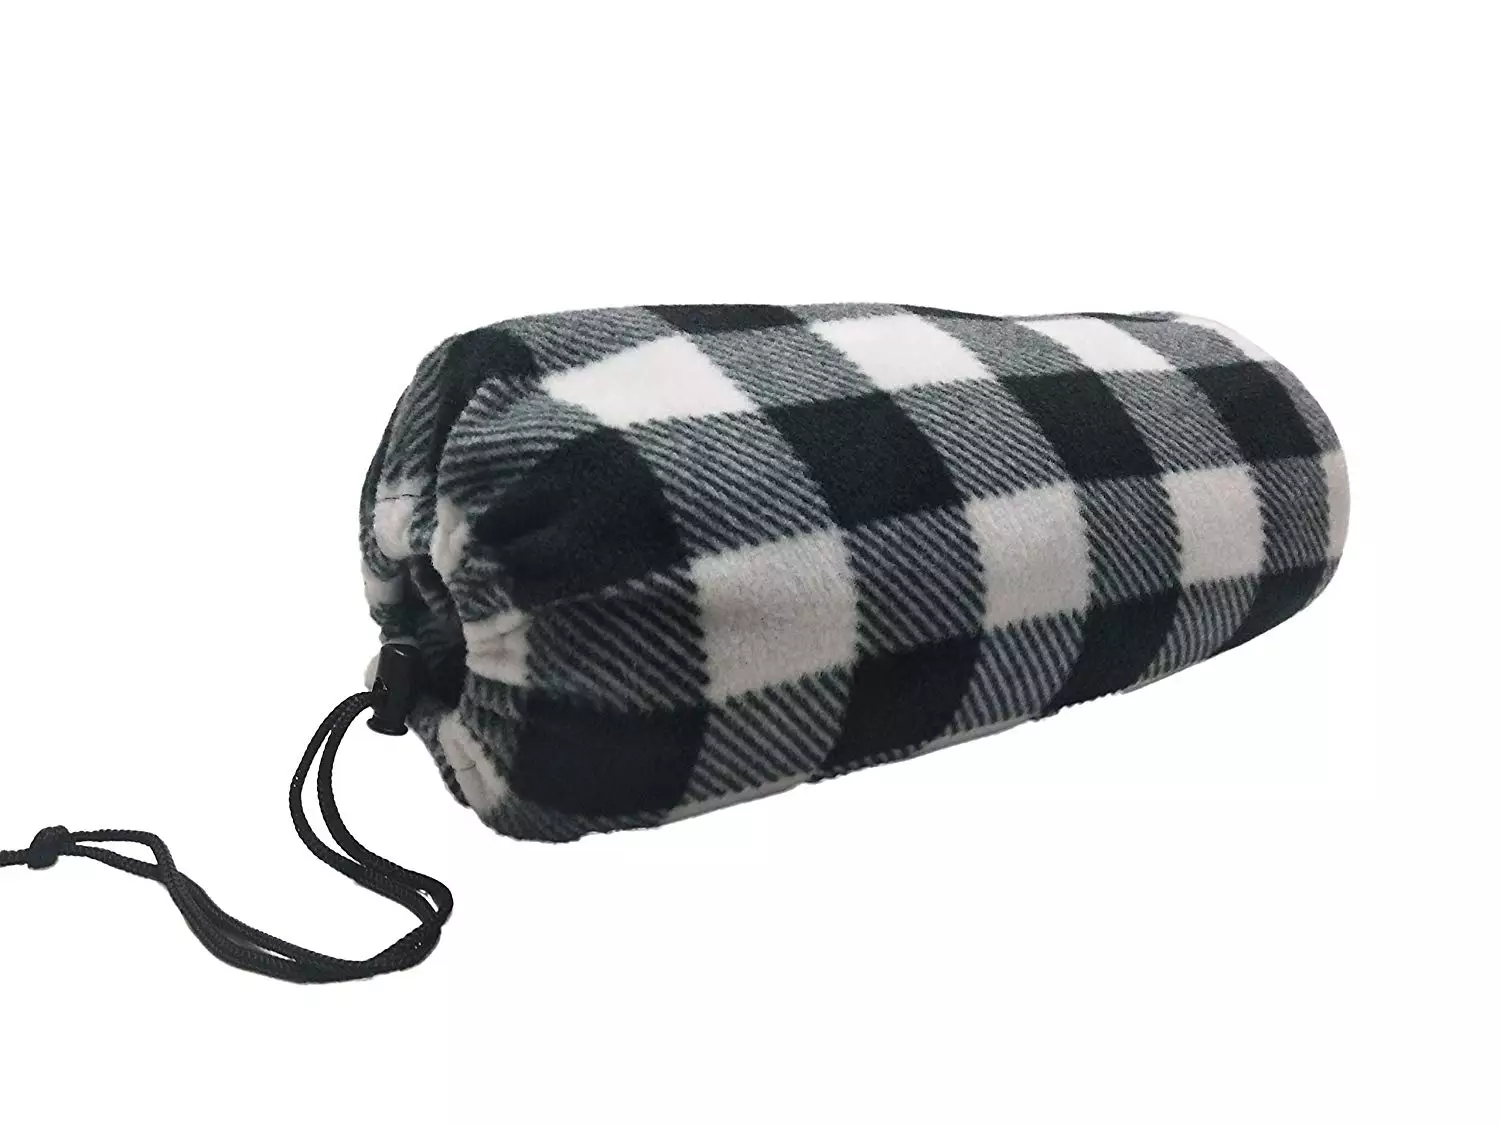 The blanket comes in a soft drawstring case (